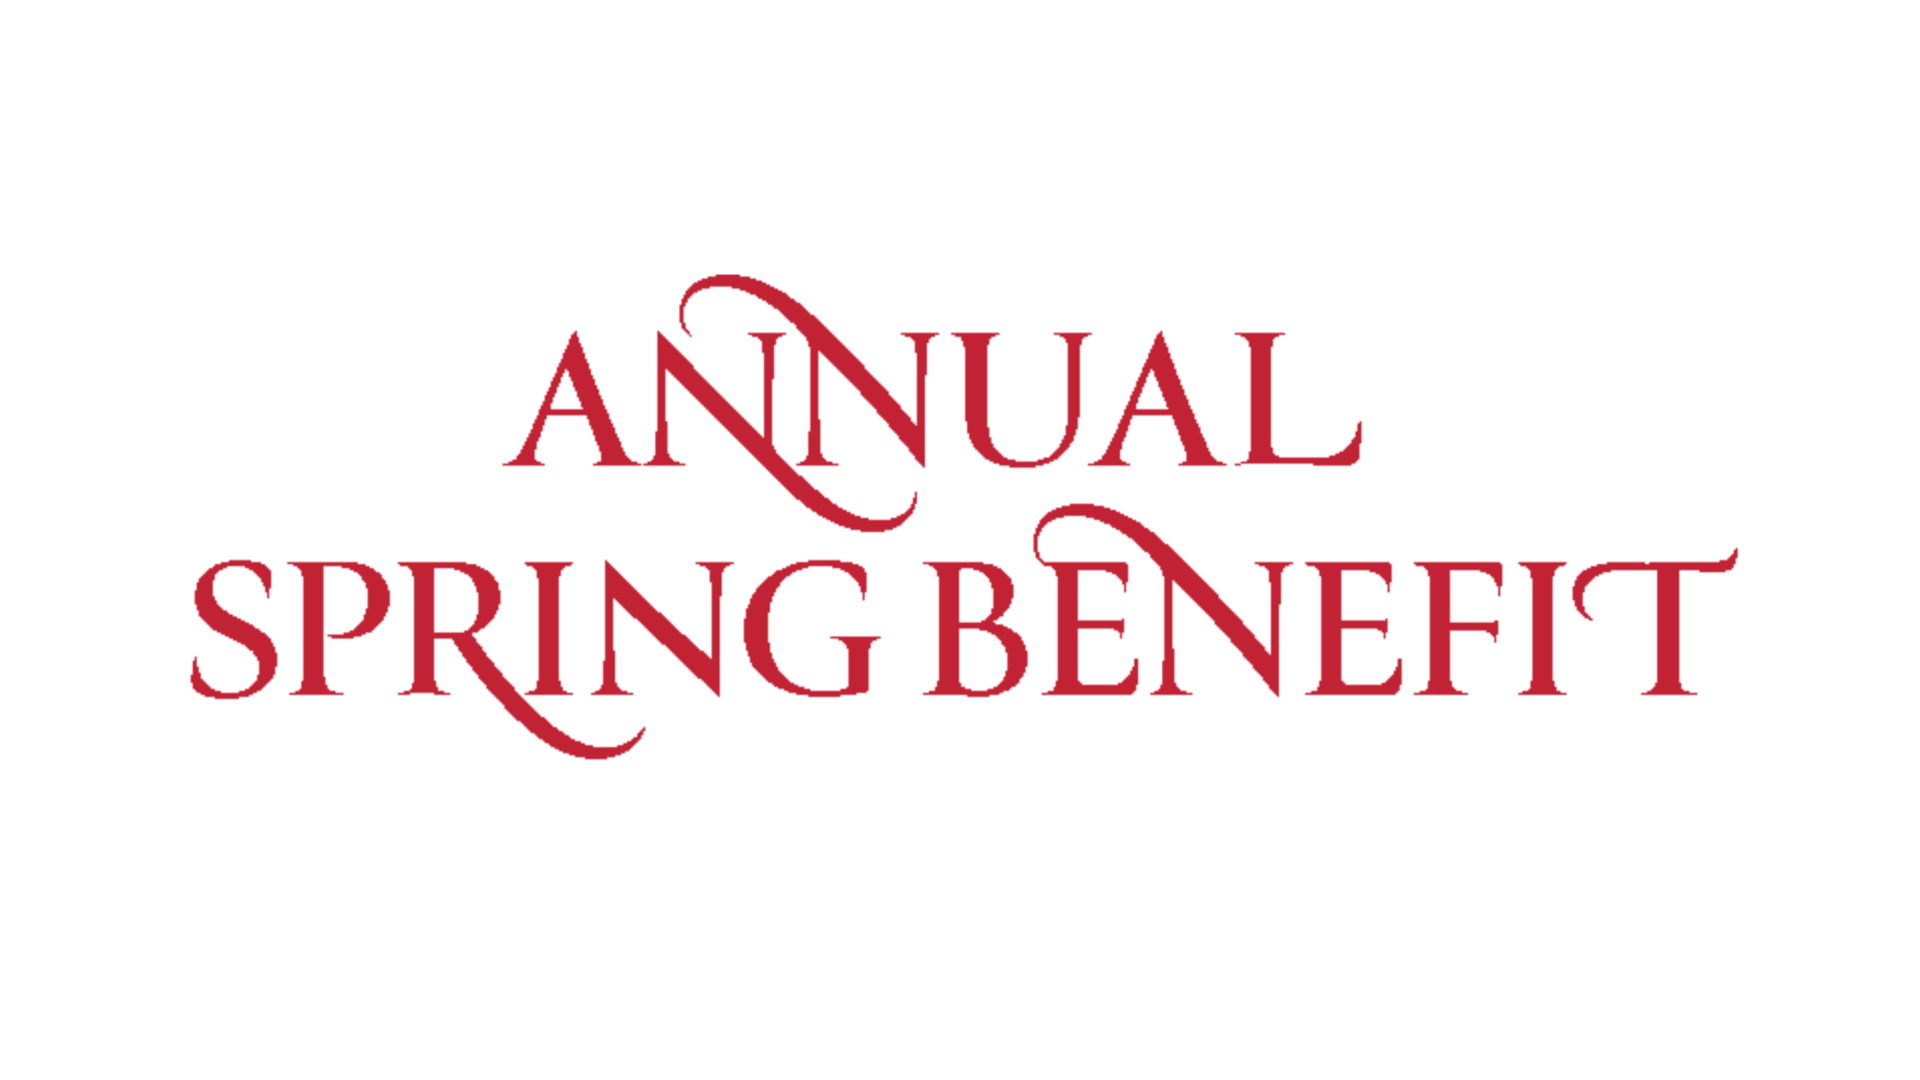 Annual Spring Benefit